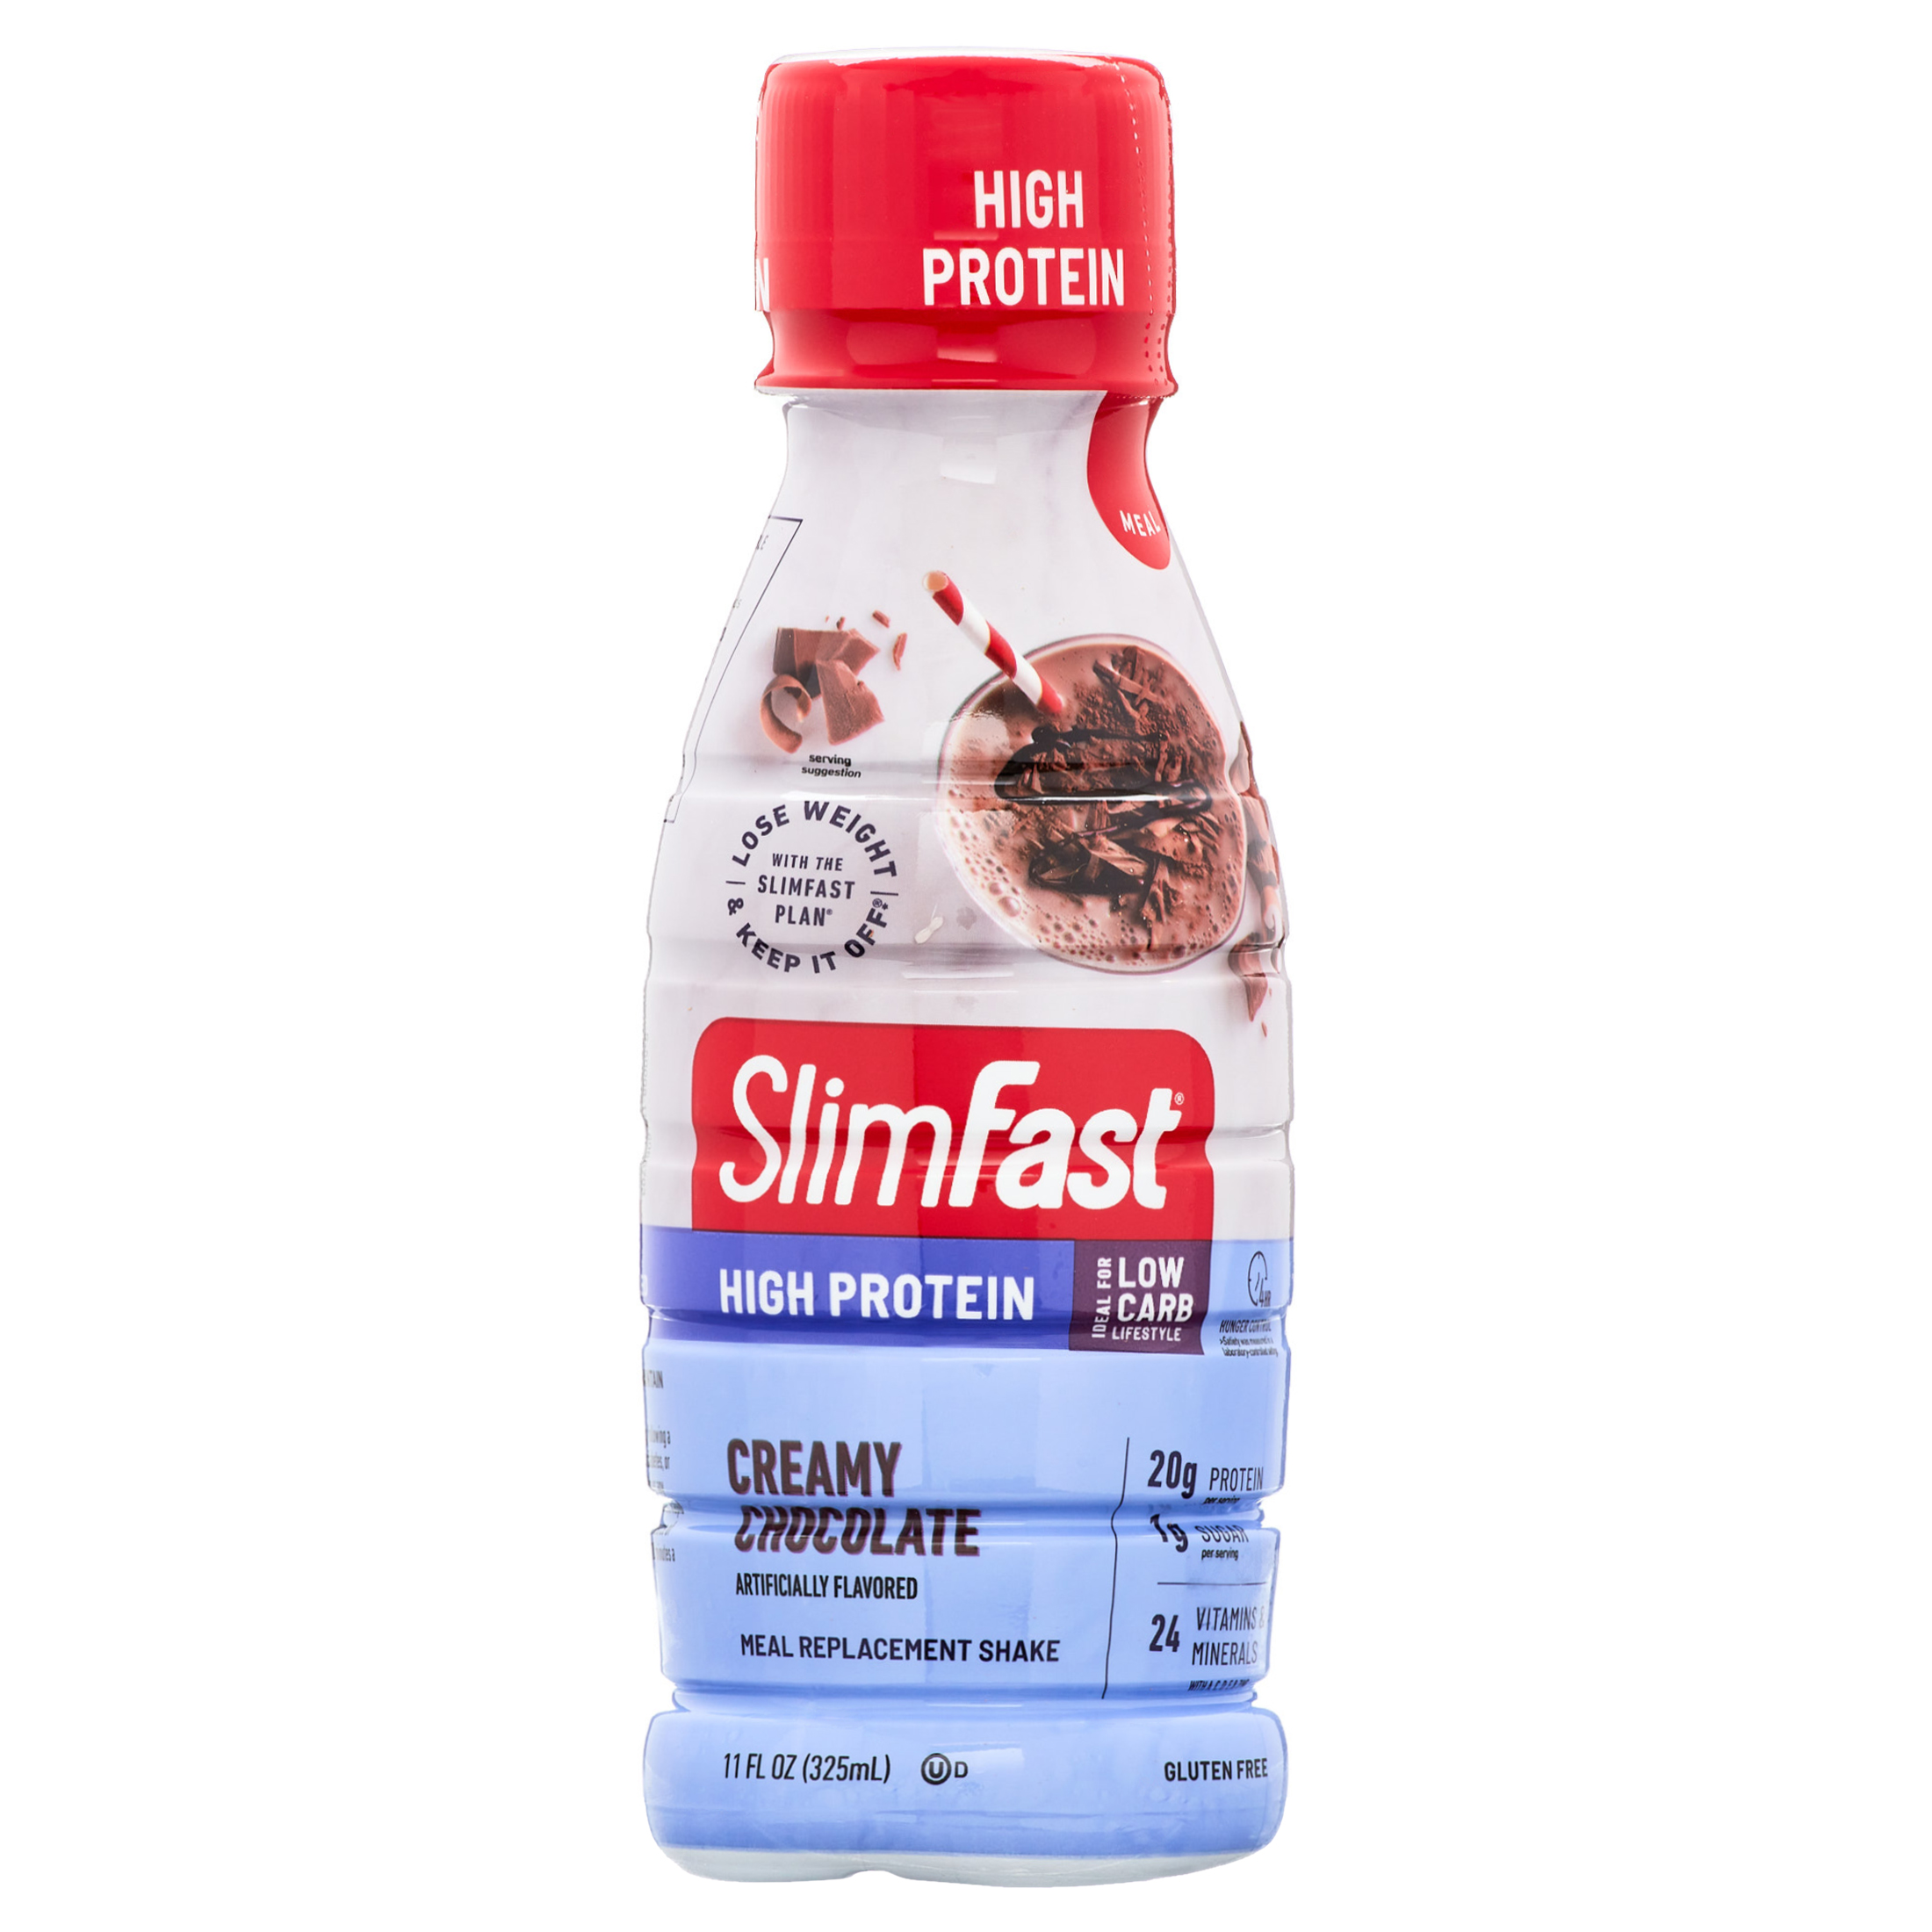 SlimFast High Protein Shake Meal Replacement Shake, Creamy Chocolate, 11 Fl Oz Bottle, 8 Pack - image 3 of 10